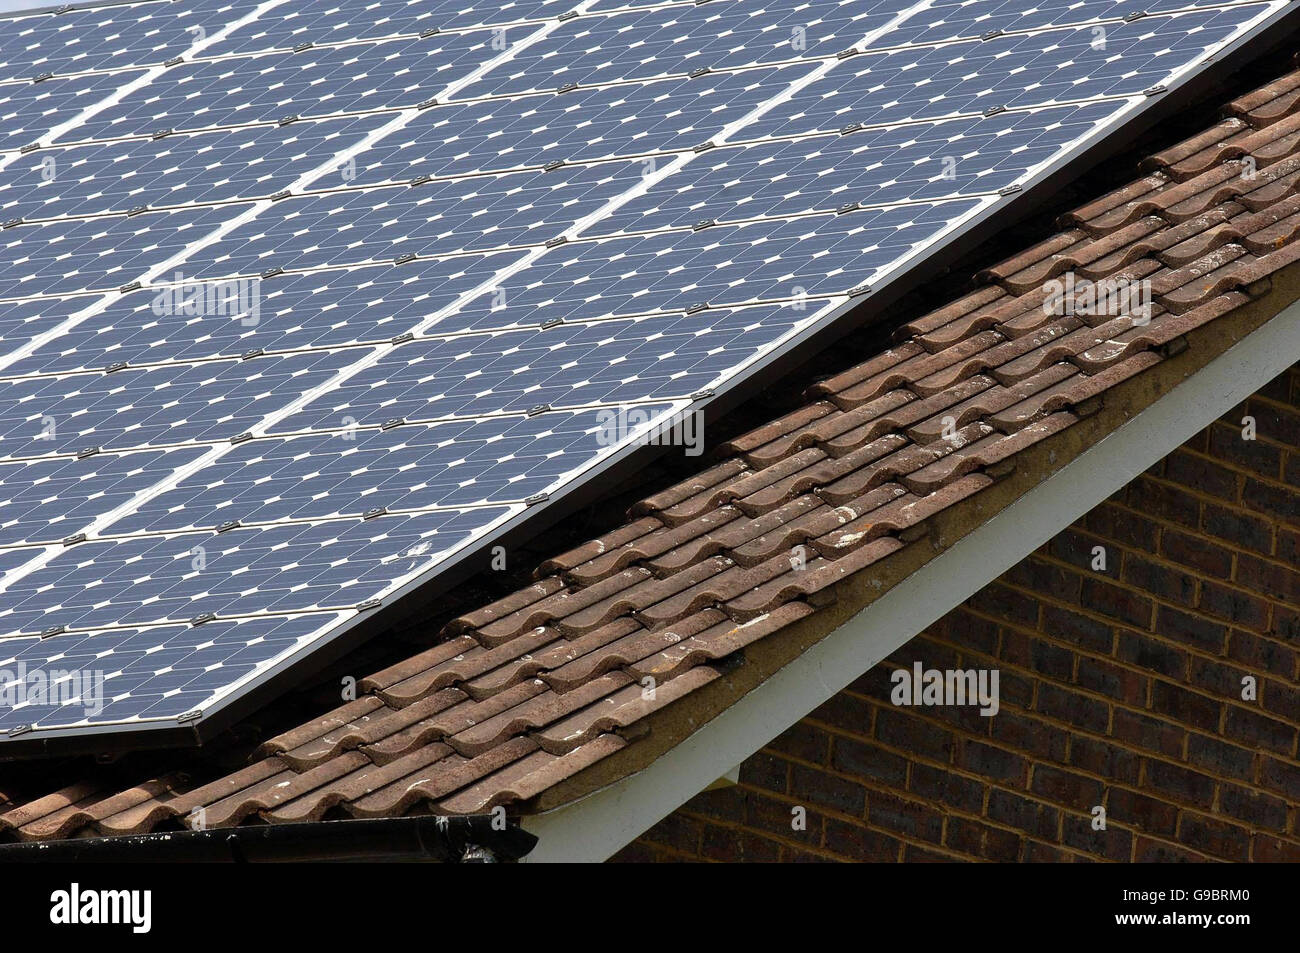 An old people's residential home in Bisley, Surrey, where the roof is covered in solar panels to save on heating bills and to help the enviroment. Stock Photo